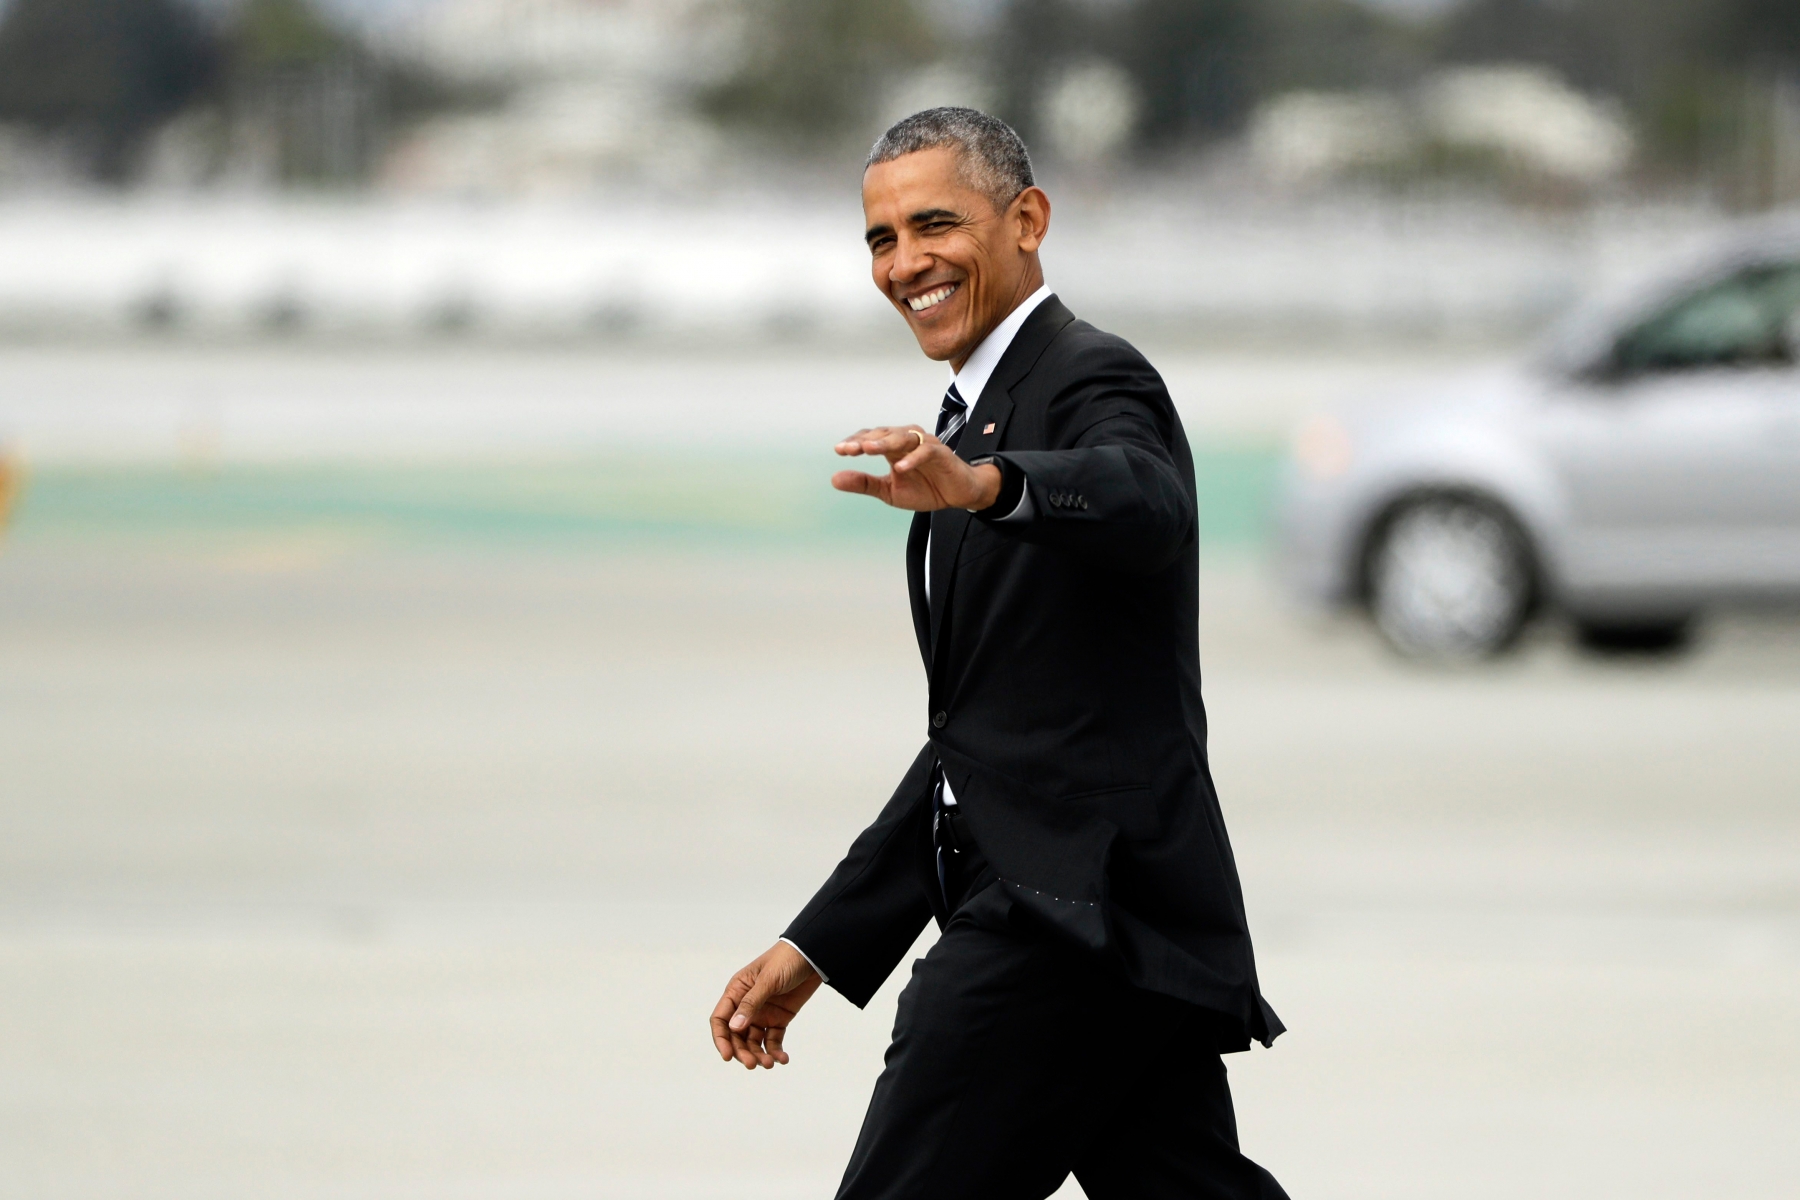 President Barack Obama waves as he walks to Marine One after arriving at the Los Angeles International Airport Monday, Oct. 24, 2016, in Los Angeles. (AP Photo/Jae C. Hong) Obama